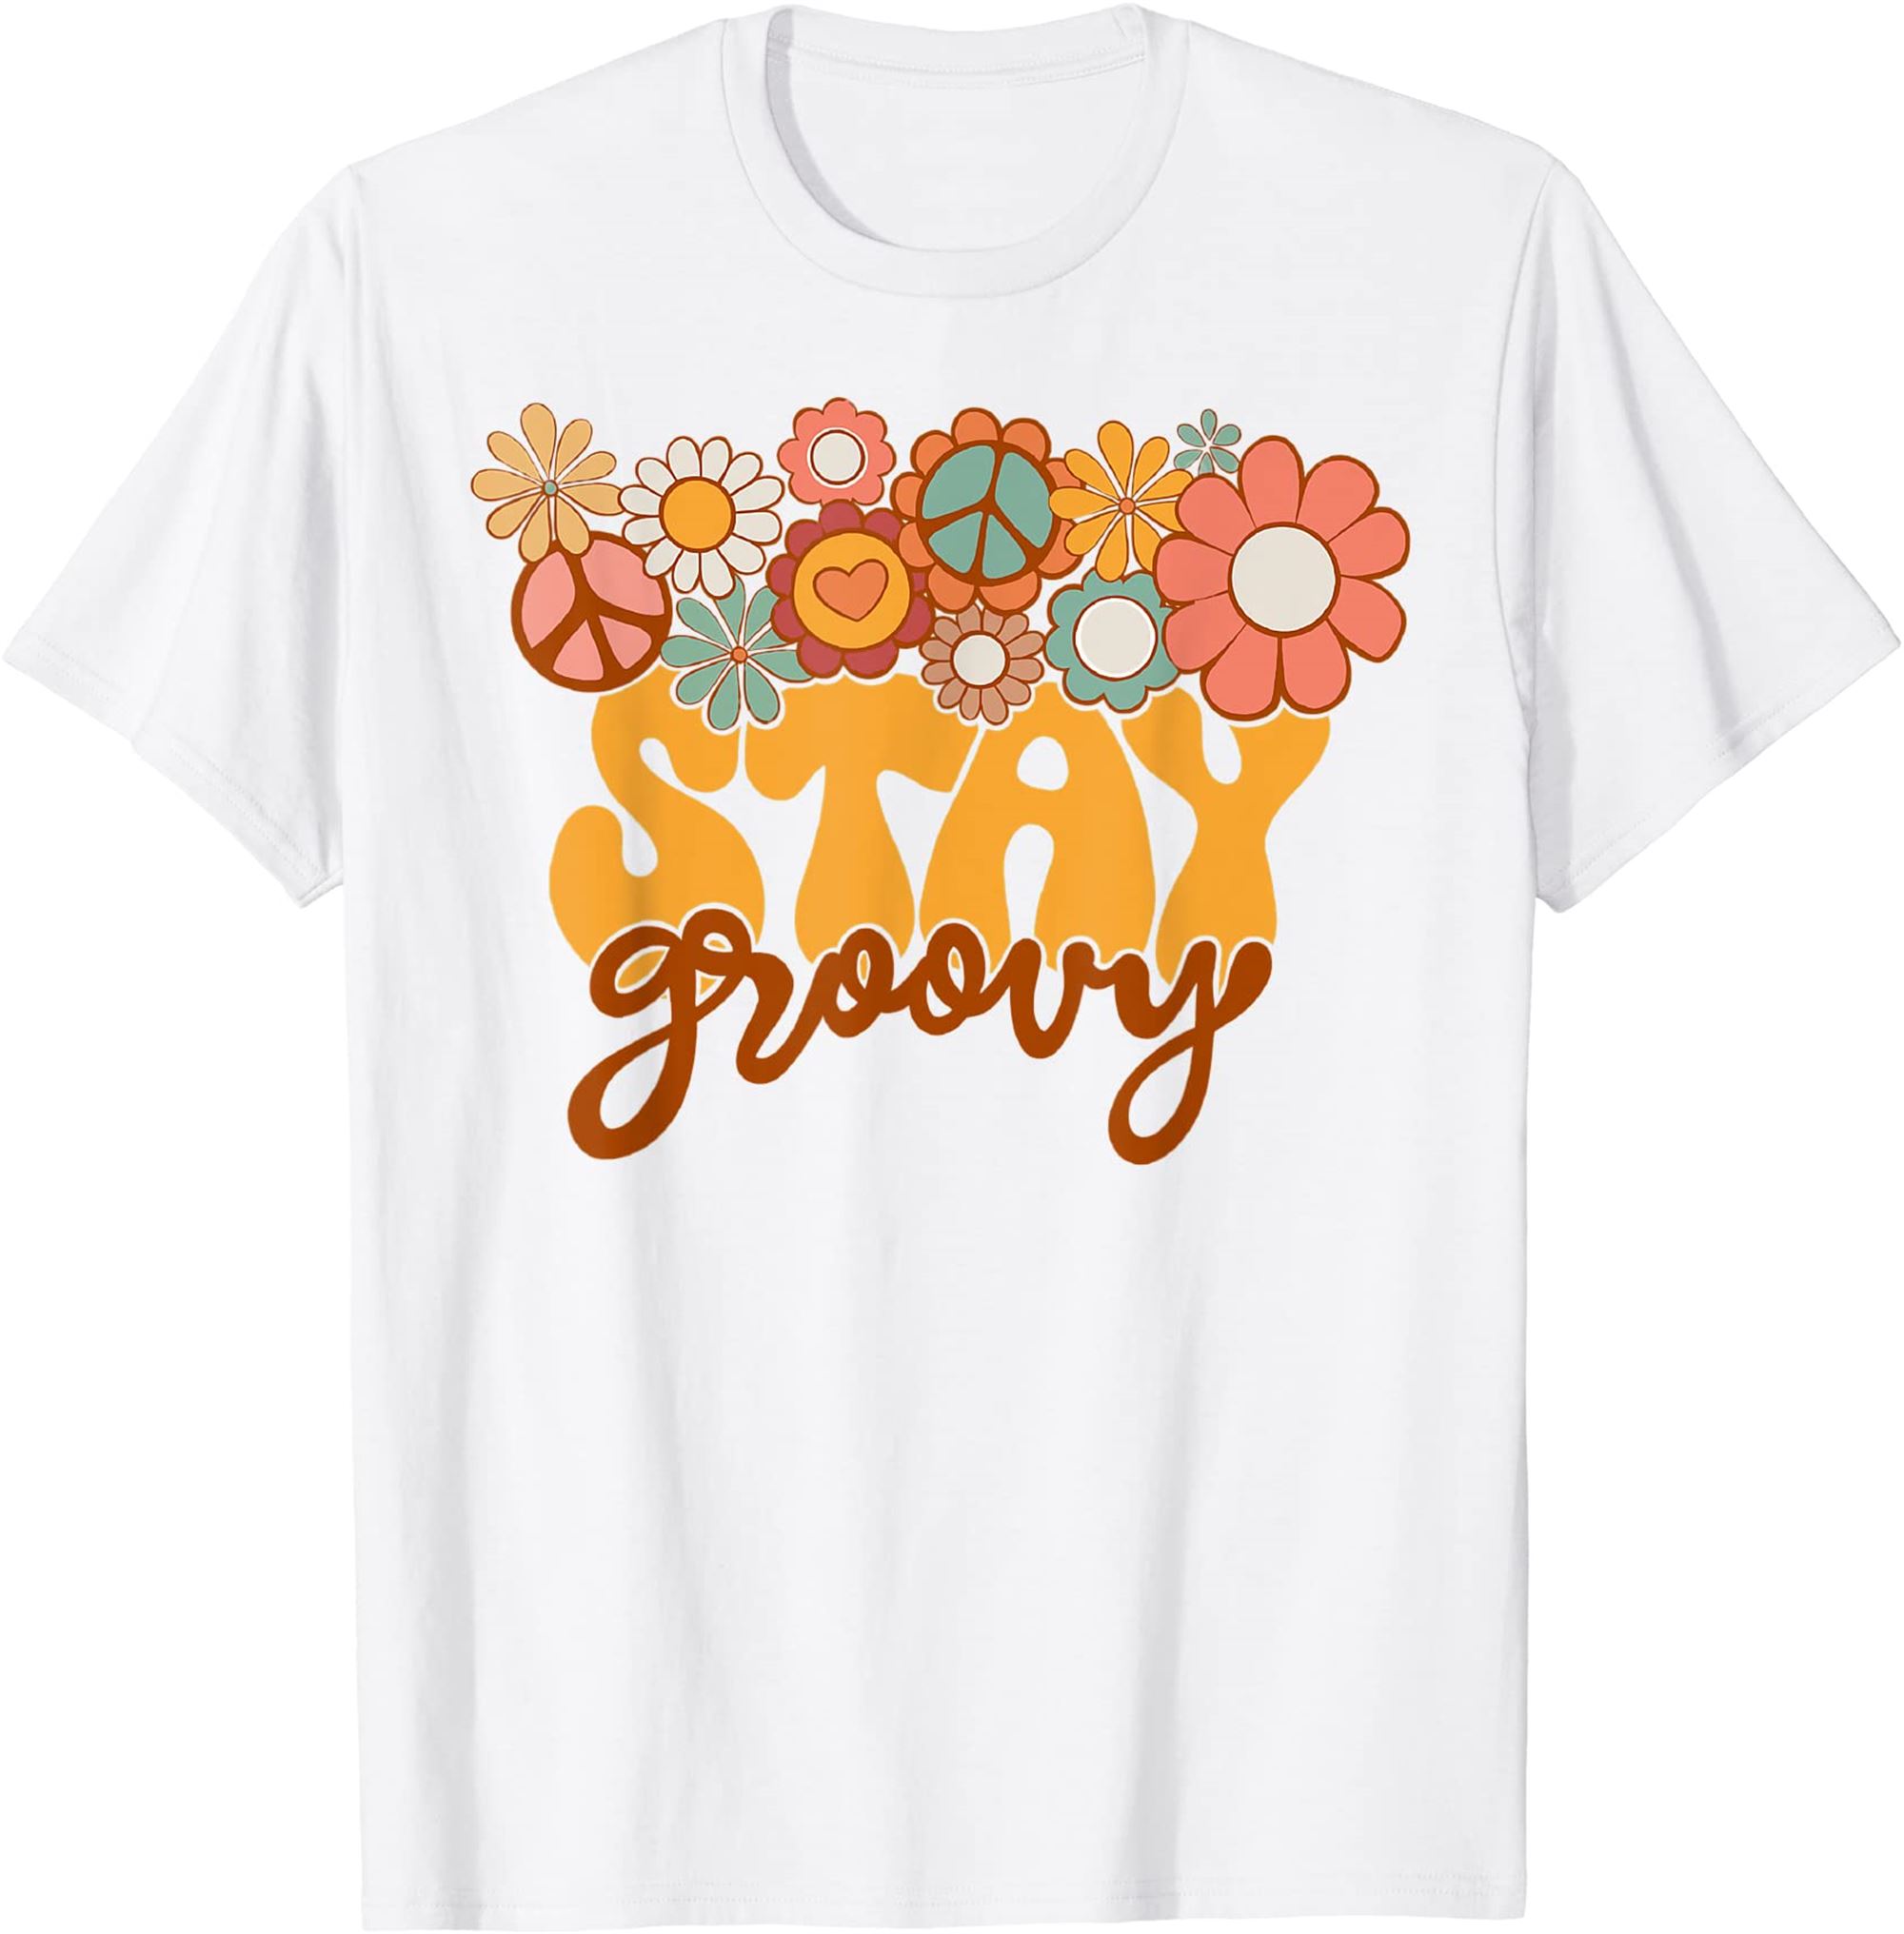 Retro Sunflower Hippie Stay Groovy Positive Mind Happy Life T-shirt Full Size Up To 5xl